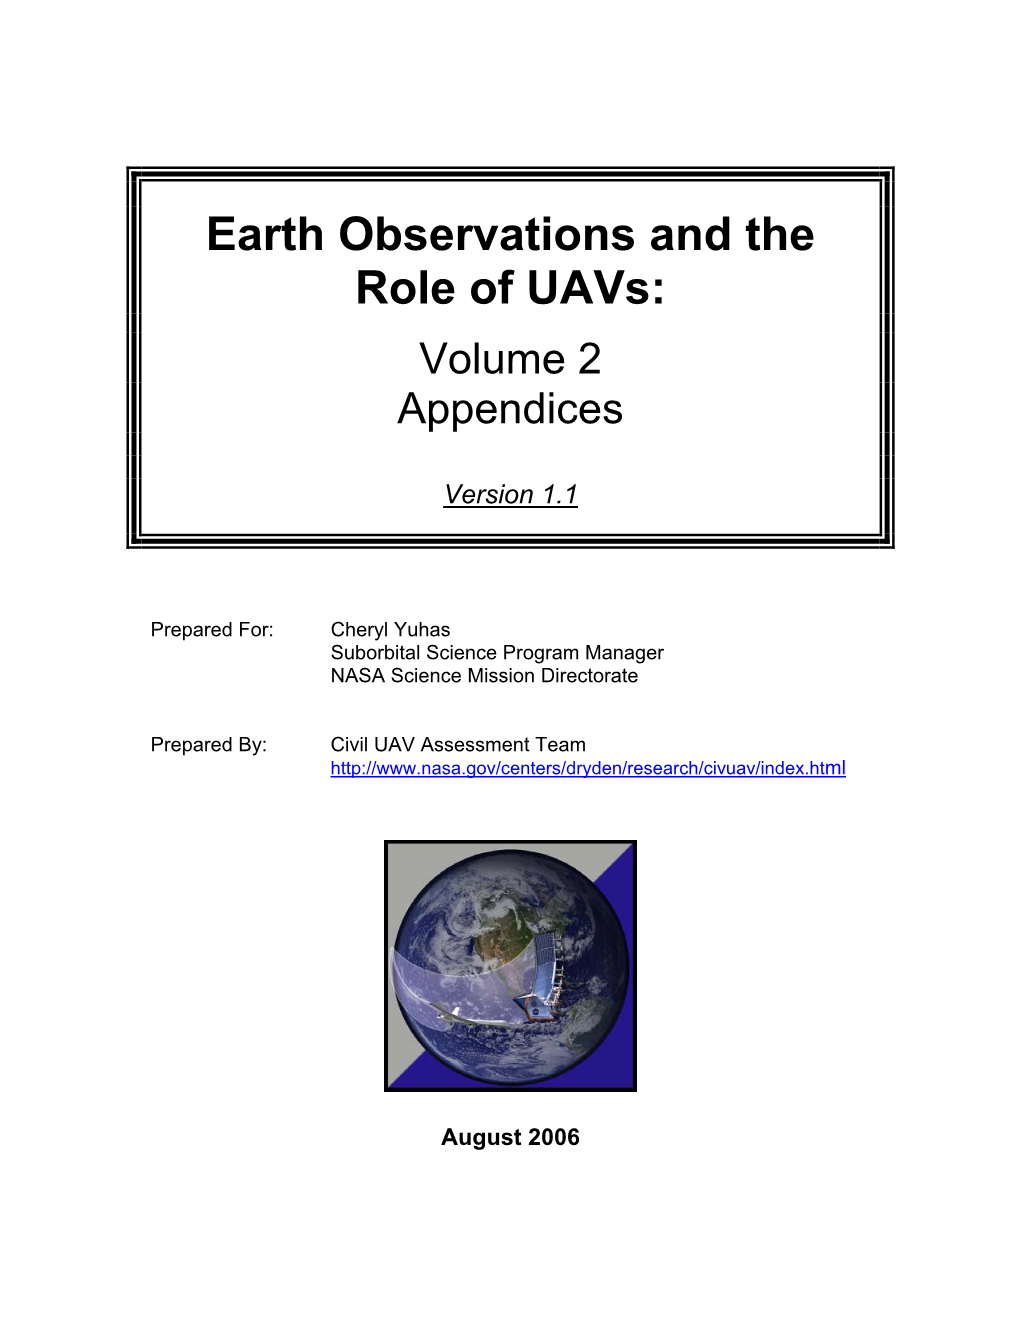 Earth Observations and the Role of Uavs